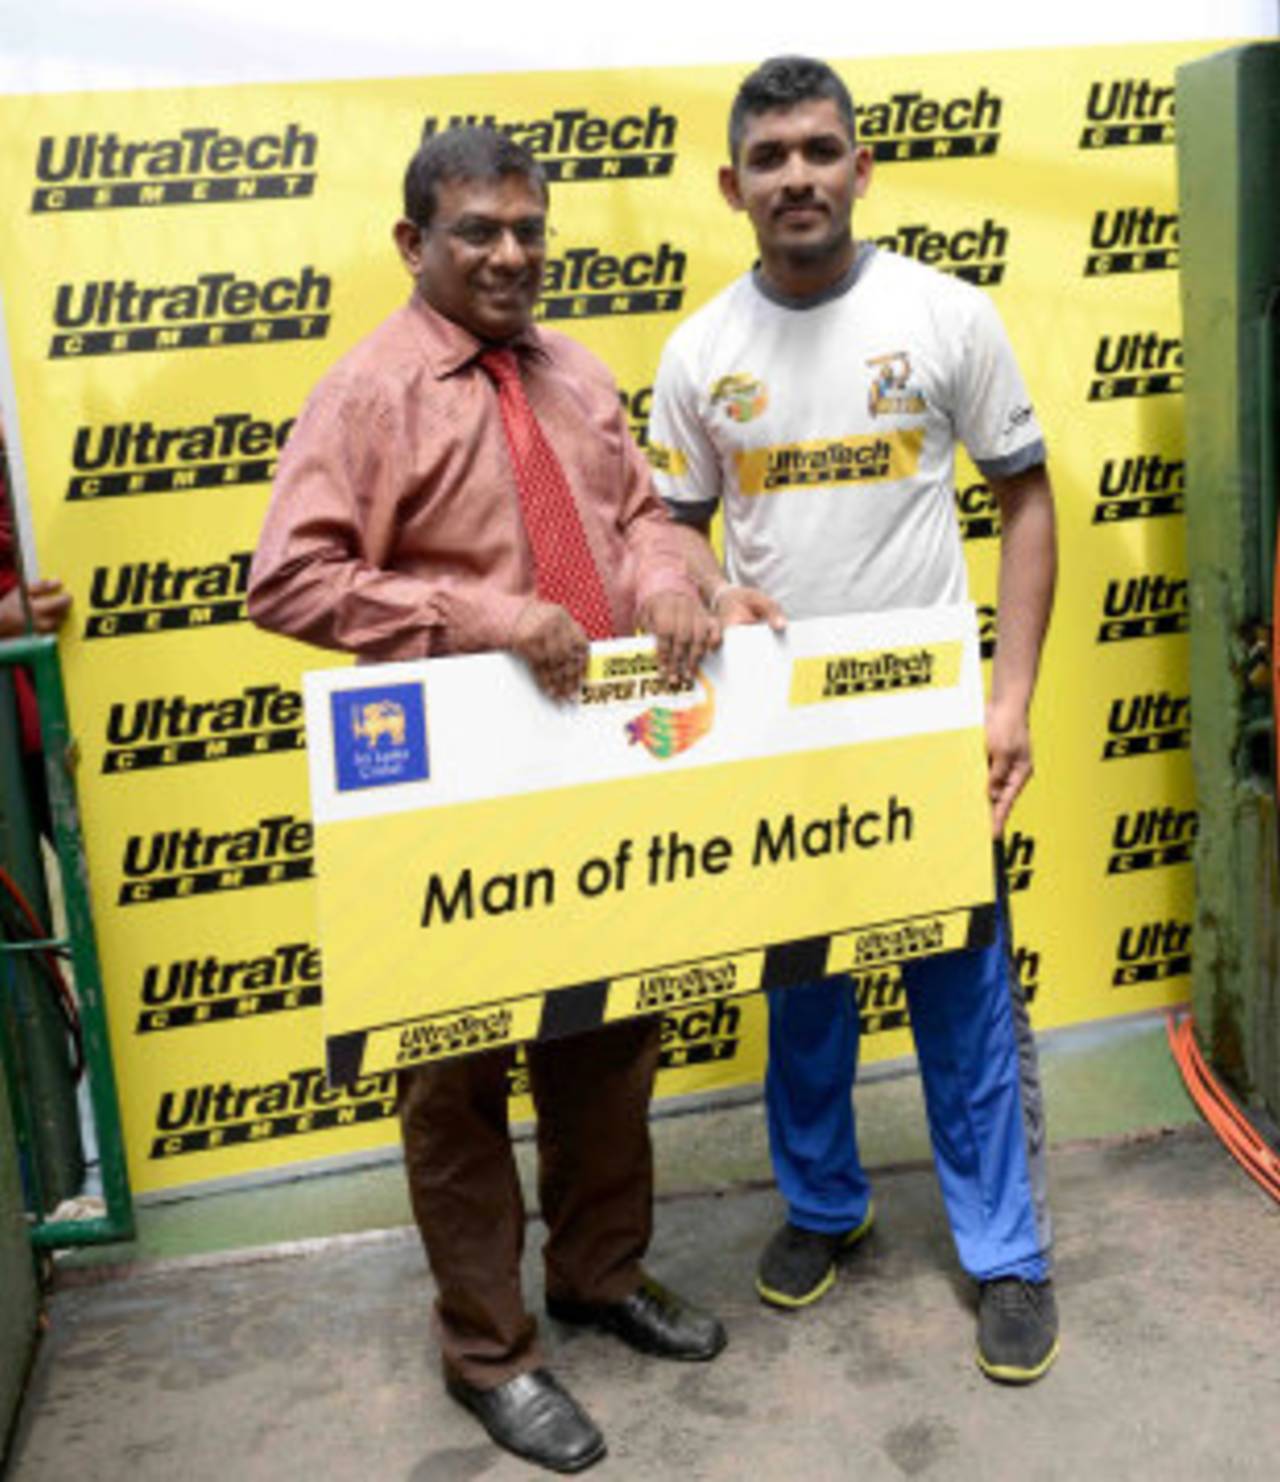 Shehan Jayasuriya receives the Man-of-the-Match award for his 30-ball 50, Udarata Rulers v Western Troopers, SLC Super 4's T20 Tournament, Colombo, June 28, 2014